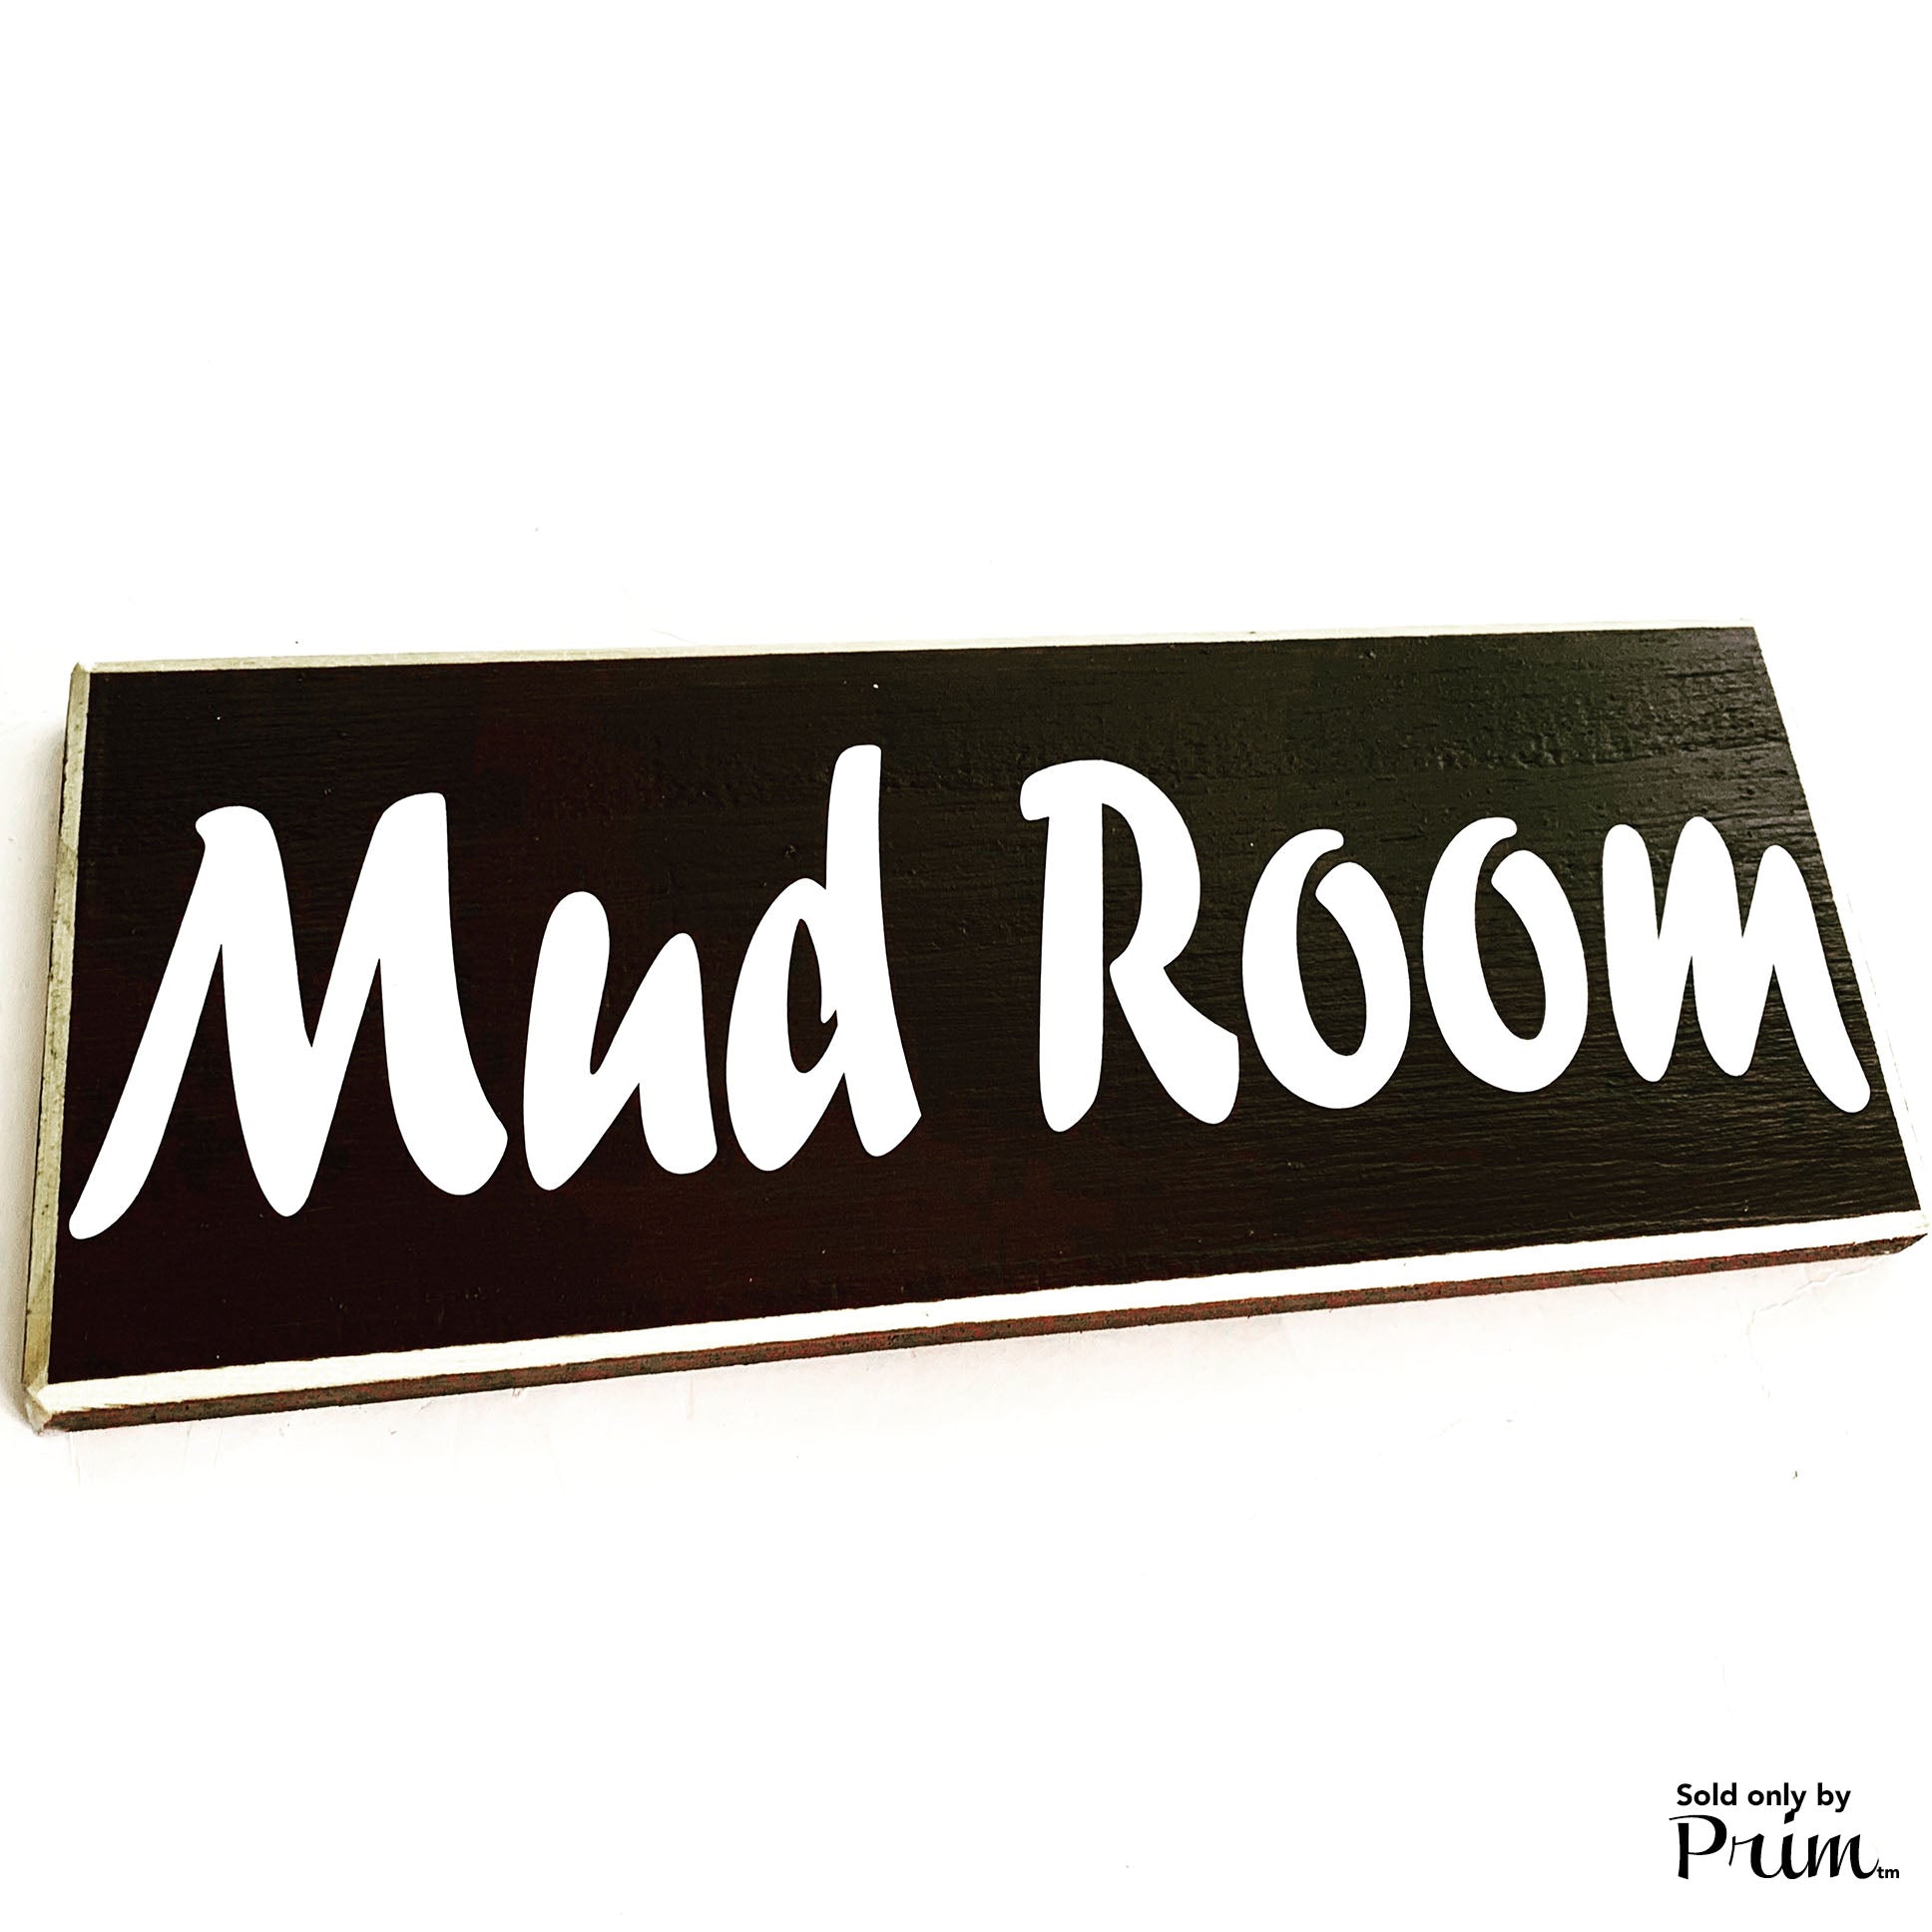 Mud Room Custom Wood Sign 12x4 Entryway Front Foyer Please Remove Your Shoes Coat Rack Storage Room Laundry